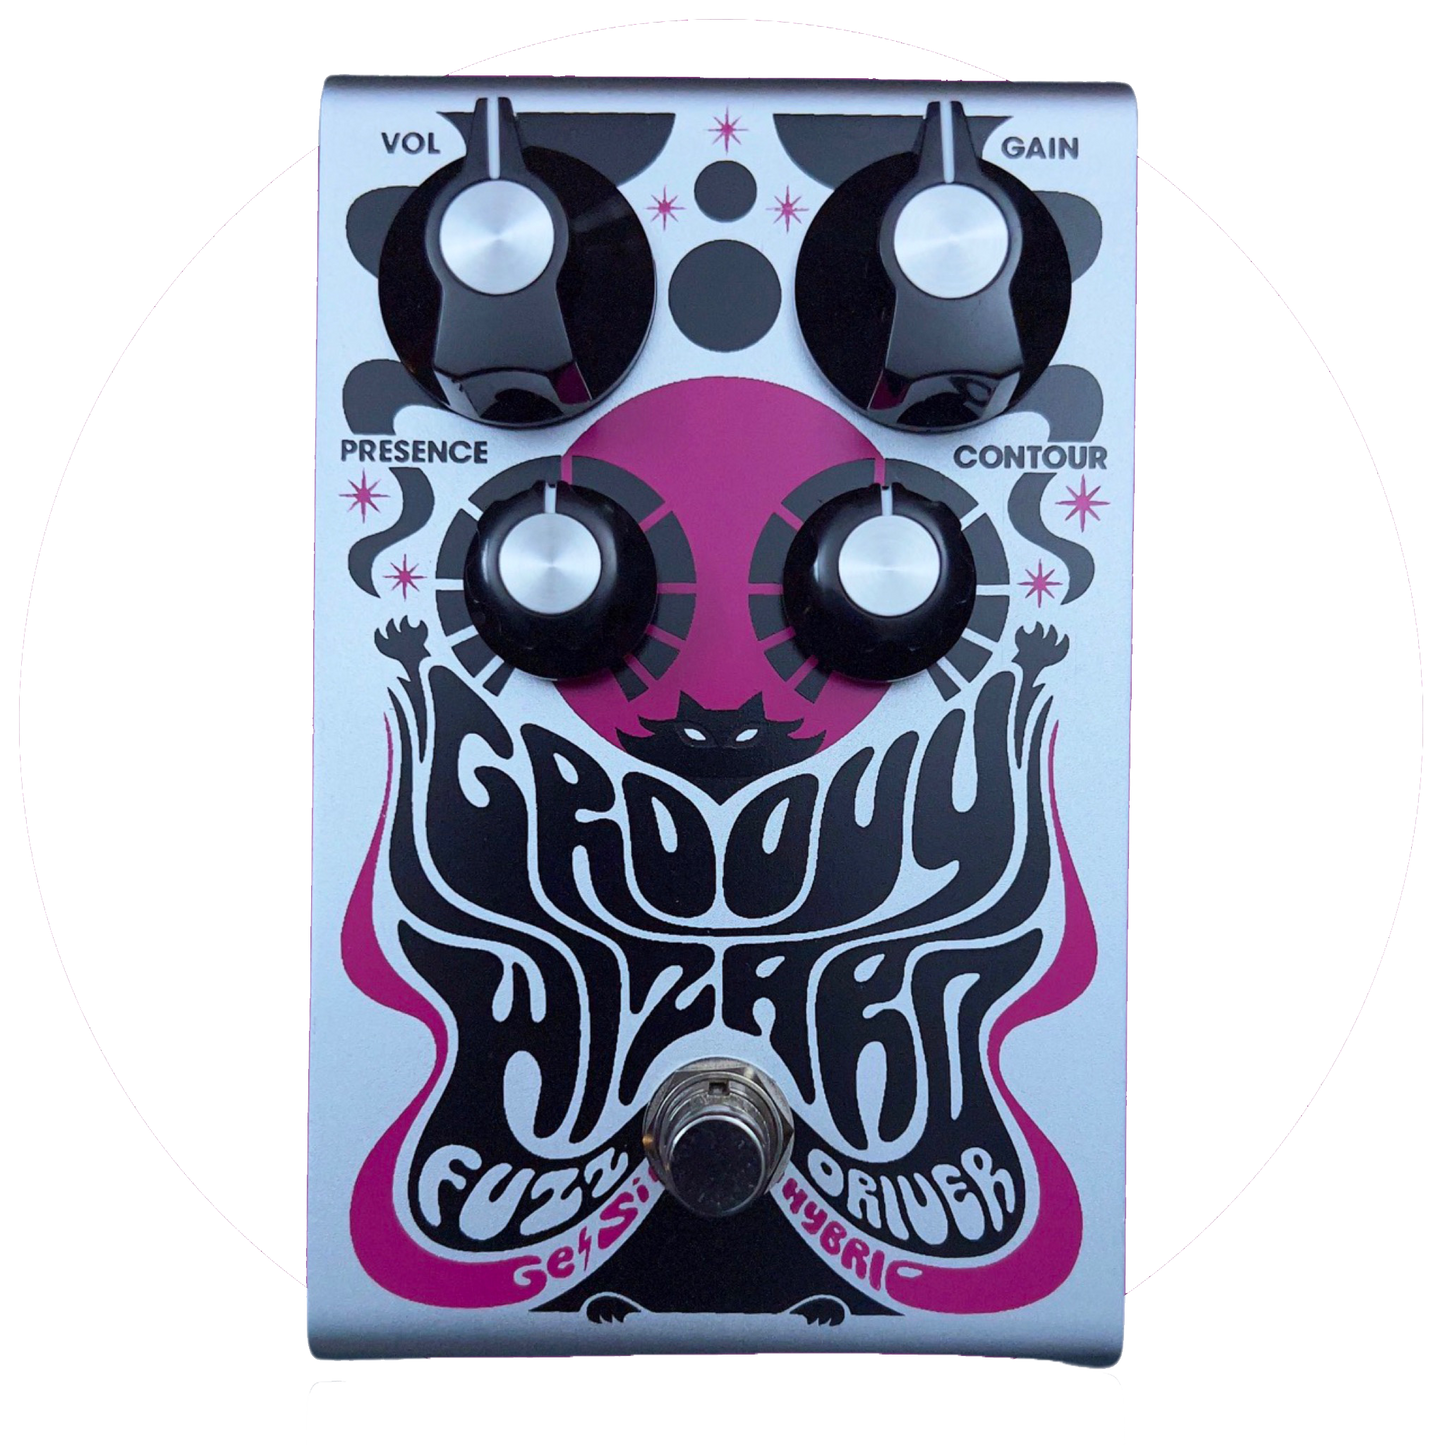 Top down of Kittycaster Fx Groovy Wizard Fuzz Driver.